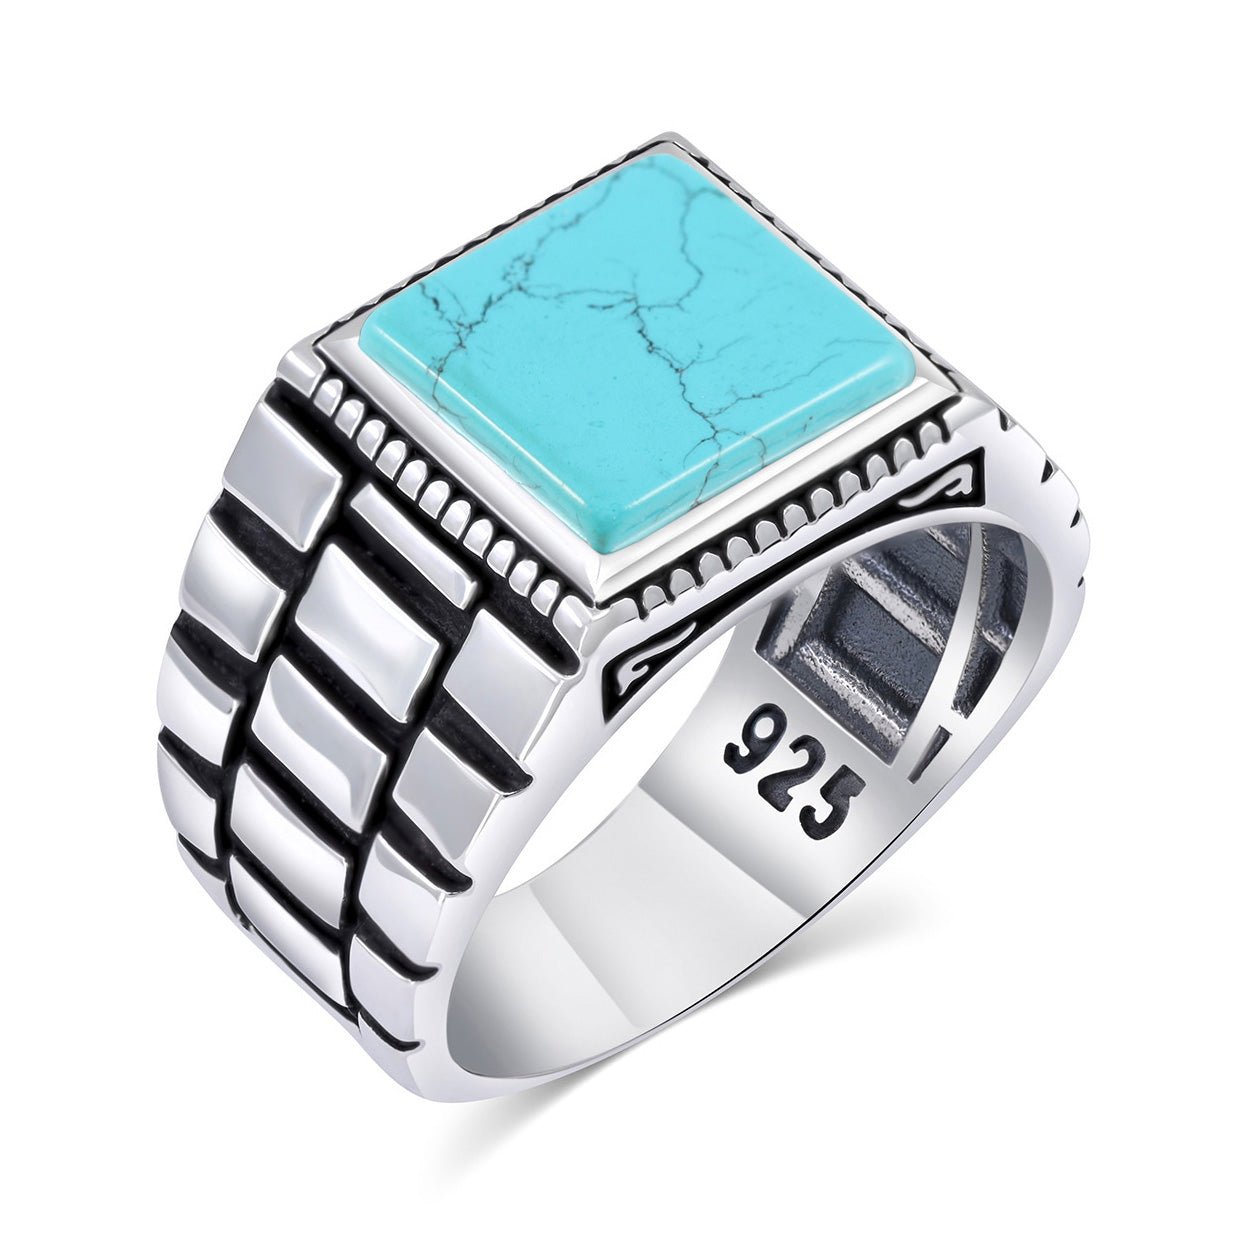 Chimoda Watch Design Sterling Silver Ring for Men Turquoise Stone